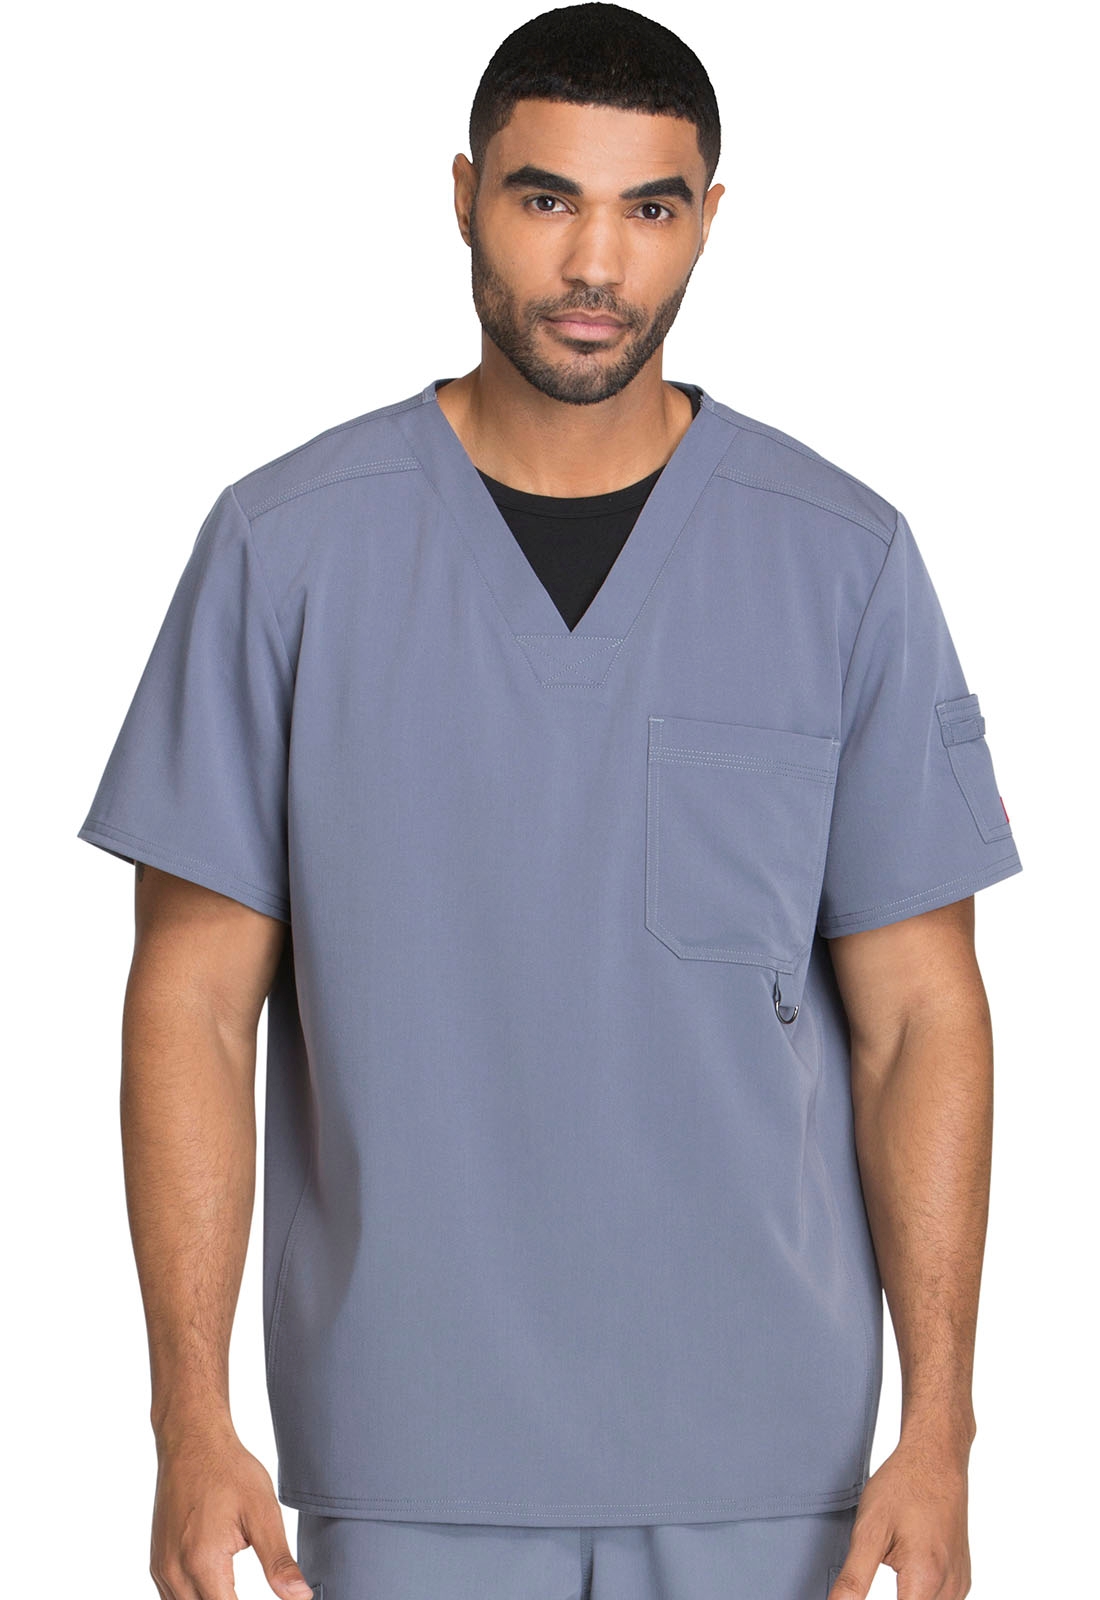 porter skive Brise Dickies Xtreme Stretch Men's Solid V-Neck Scrub Top-81910 | Medical Scrubs  Collection